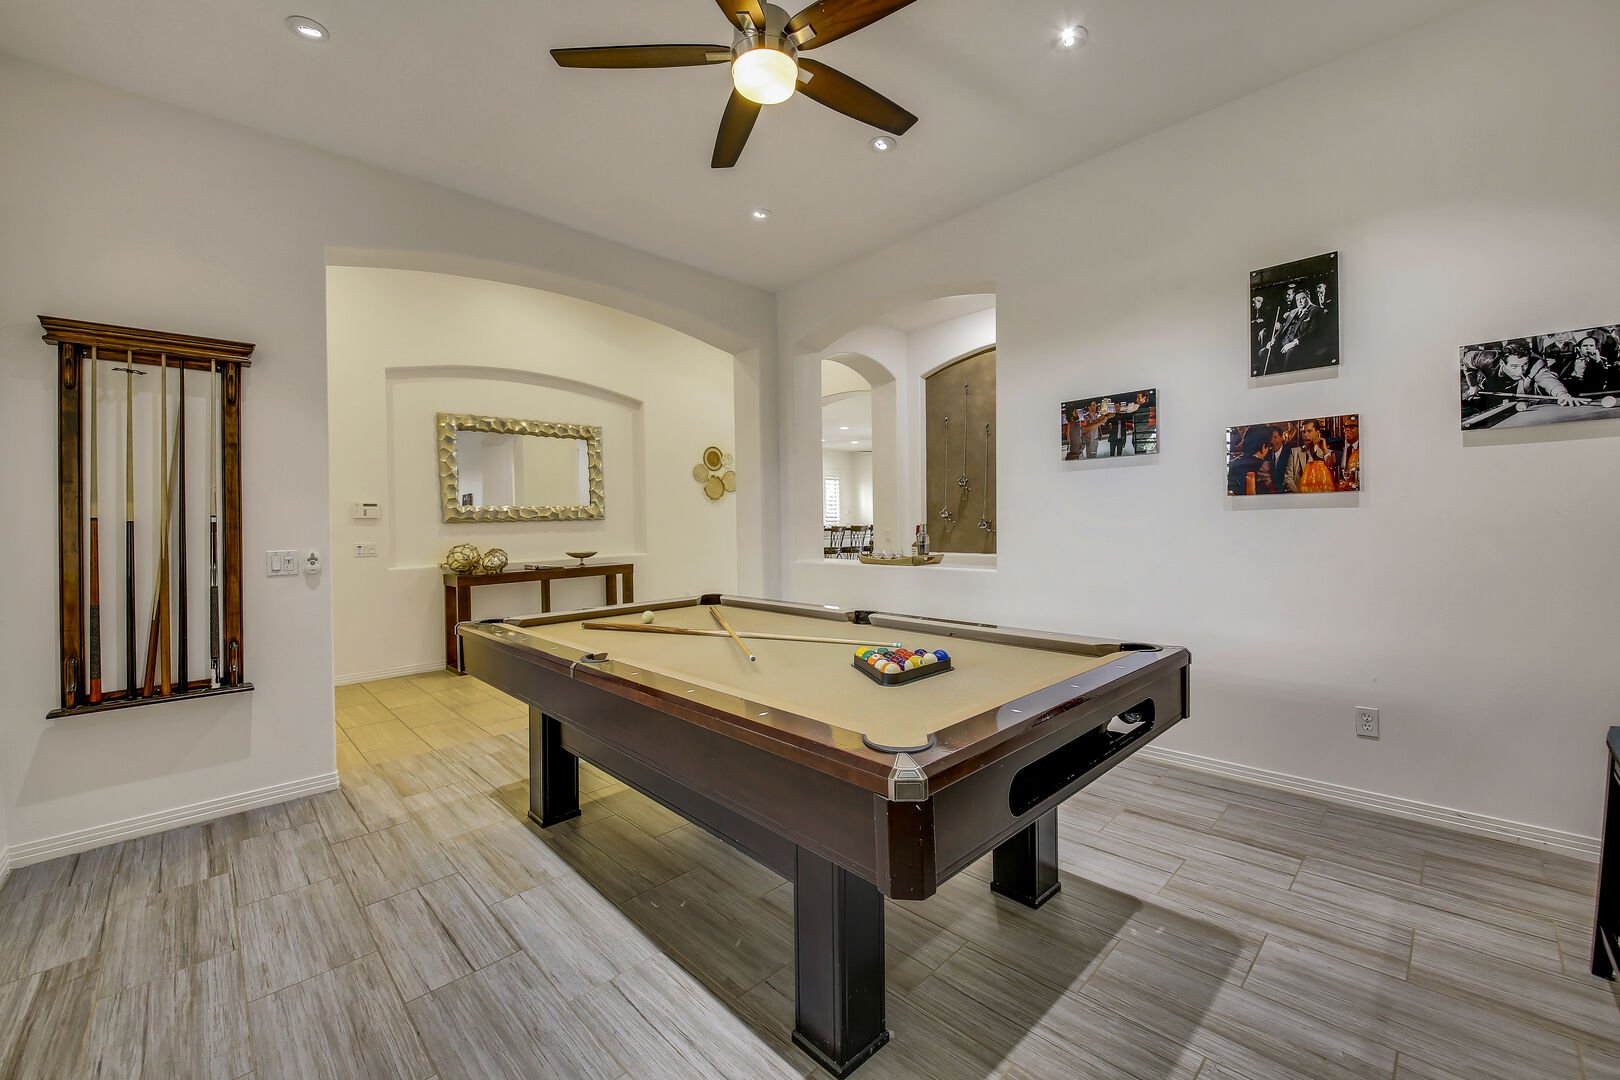 Enjoy the magnificent pool table area and spark a competition.